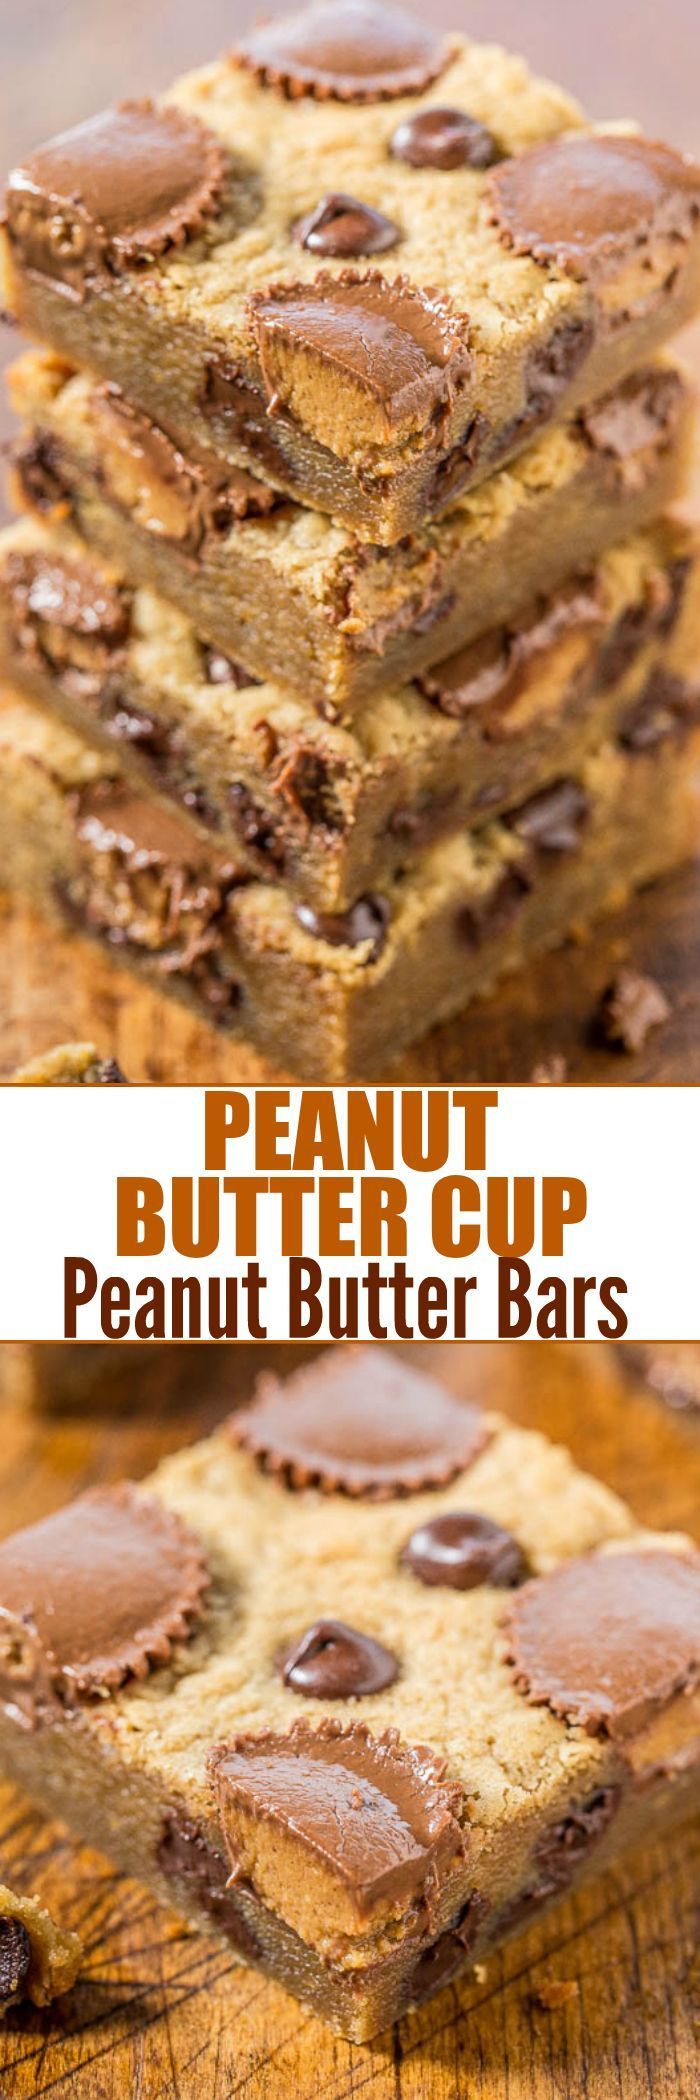 Peanut Butter Cup Peanut Butter Bars – Loaded with peanut butter, peanut butter cups and chocolate!! Soft,